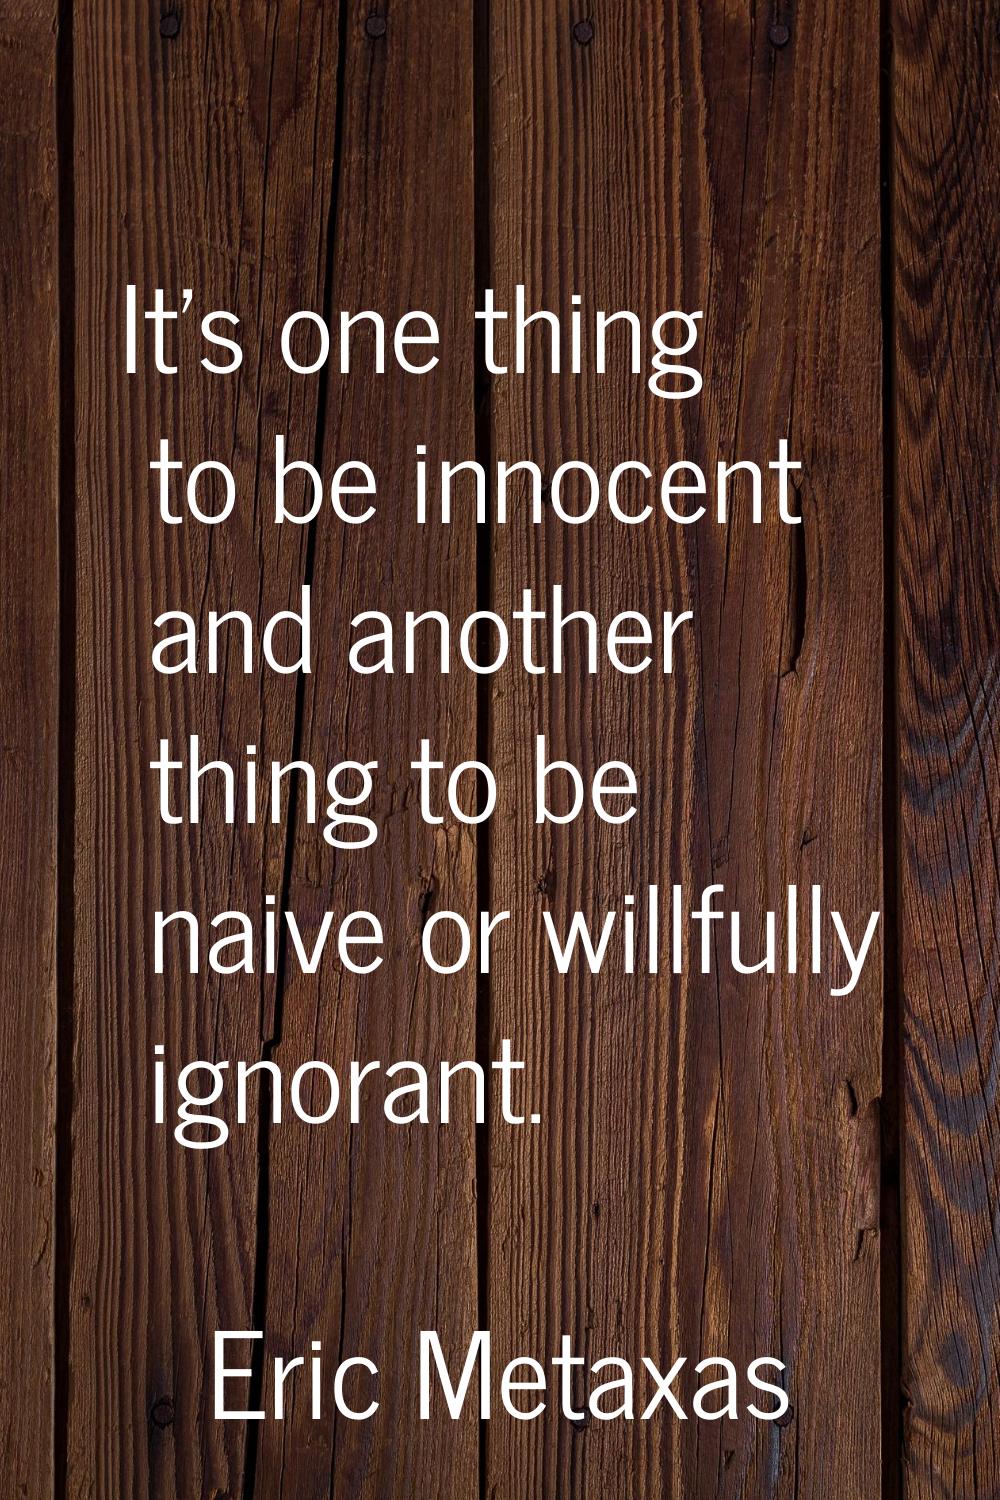 It's one thing to be innocent and another thing to be naive or willfully ignorant.